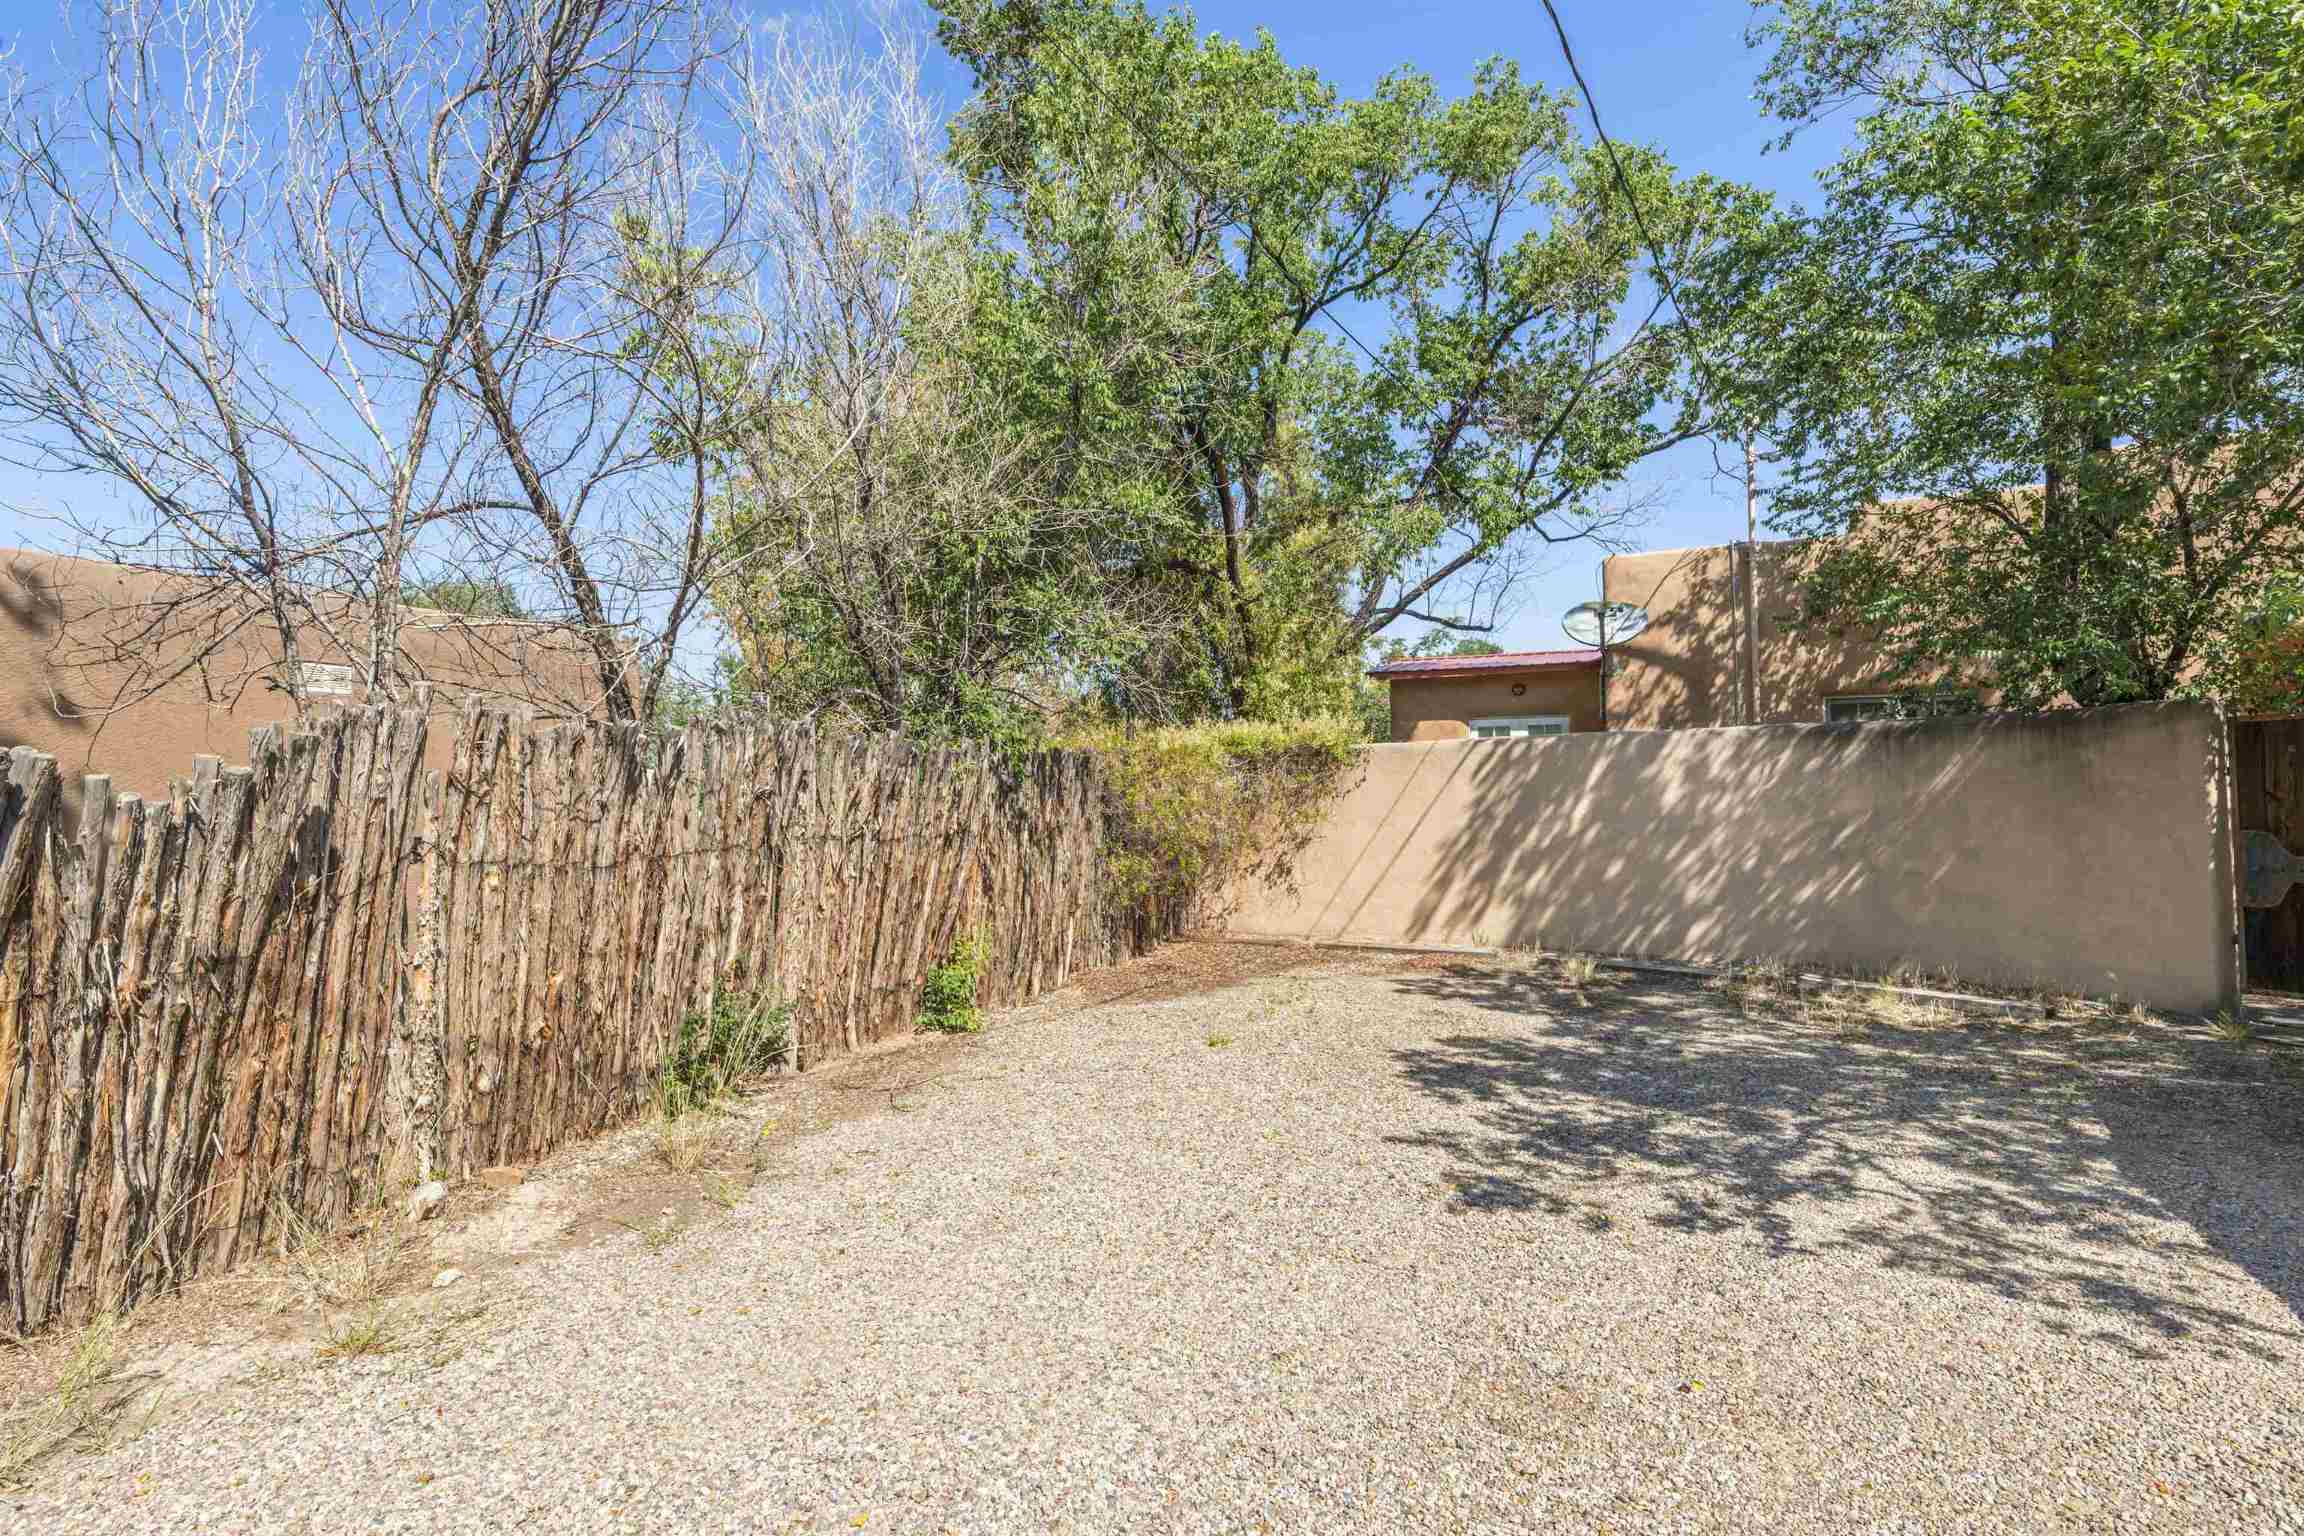 907 1/2 Agua Fria A, Santa Fe, New Mexico 87501, 1 Bedroom Bedrooms, ,1 BathroomBathrooms,Residential,For Sale,907 1/2 Agua Fria A,202103996